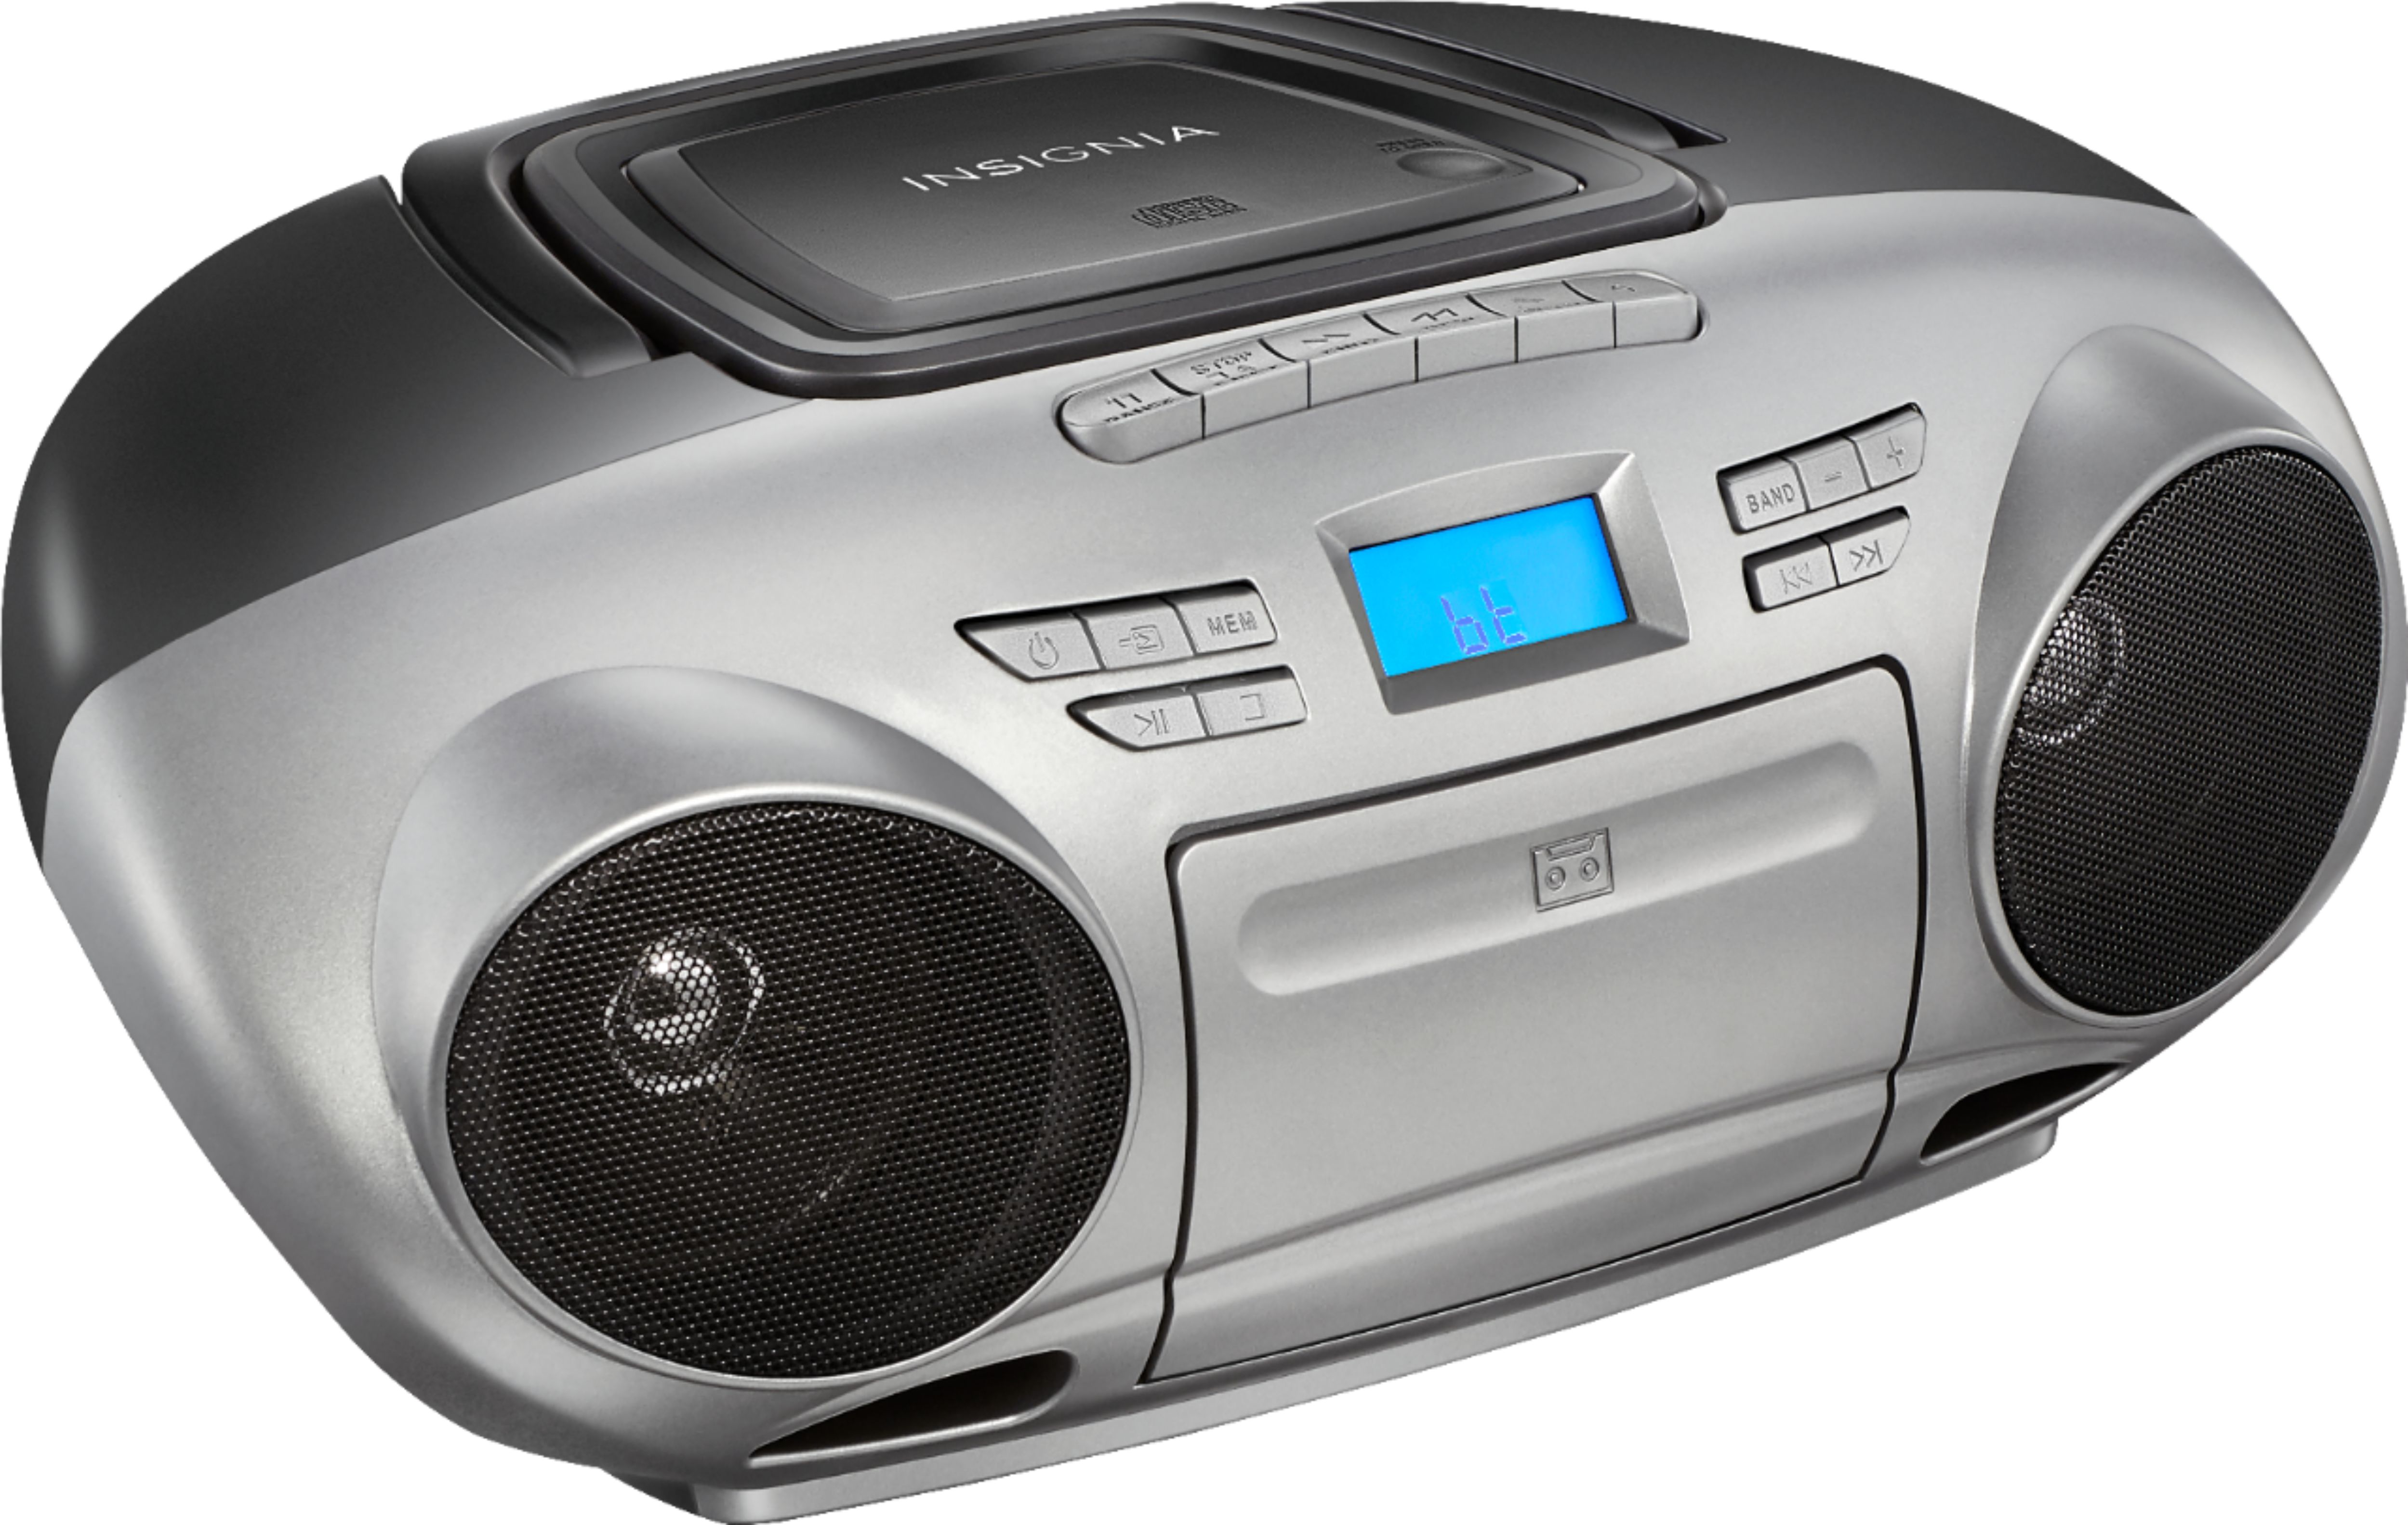 Angle View: Insignia™ - AM/FM Radio Portable CD Boombox with Bluetooth - Silver/Black